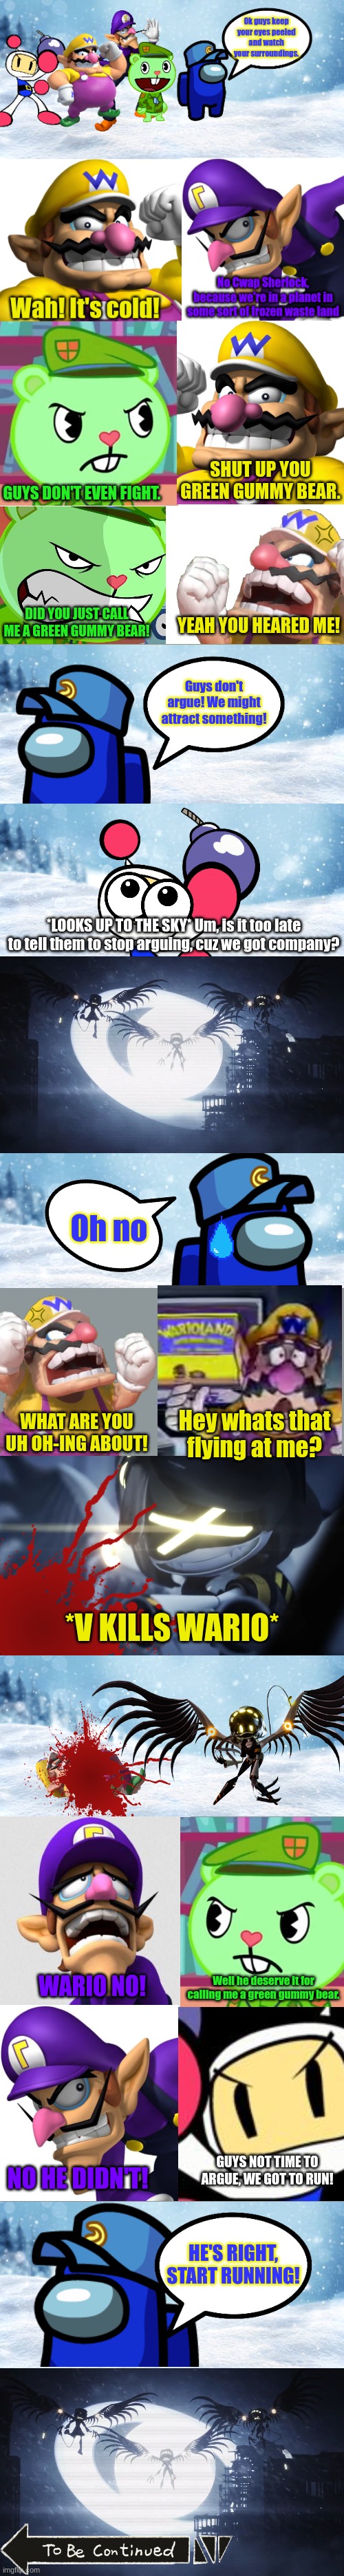 Cam and Wario trying to get out of Wolf 1016c with others Part 1 | Hey whats that flying at me? WHAT ARE YOU UH OH-ING ABOUT! *V KILLS WARIO*; Well he deserve it for calling me a green gummy bear. WARIO NO! GUYS NOT TIME TO ARGUE, WE GOT TO RUN! NO HE DIDN'T! HE'S RIGHT, START RUNNING! | image tagged in murder drones,bomberman,happy tree friends,wario,waluigi,crossover | made w/ Imgflip meme maker